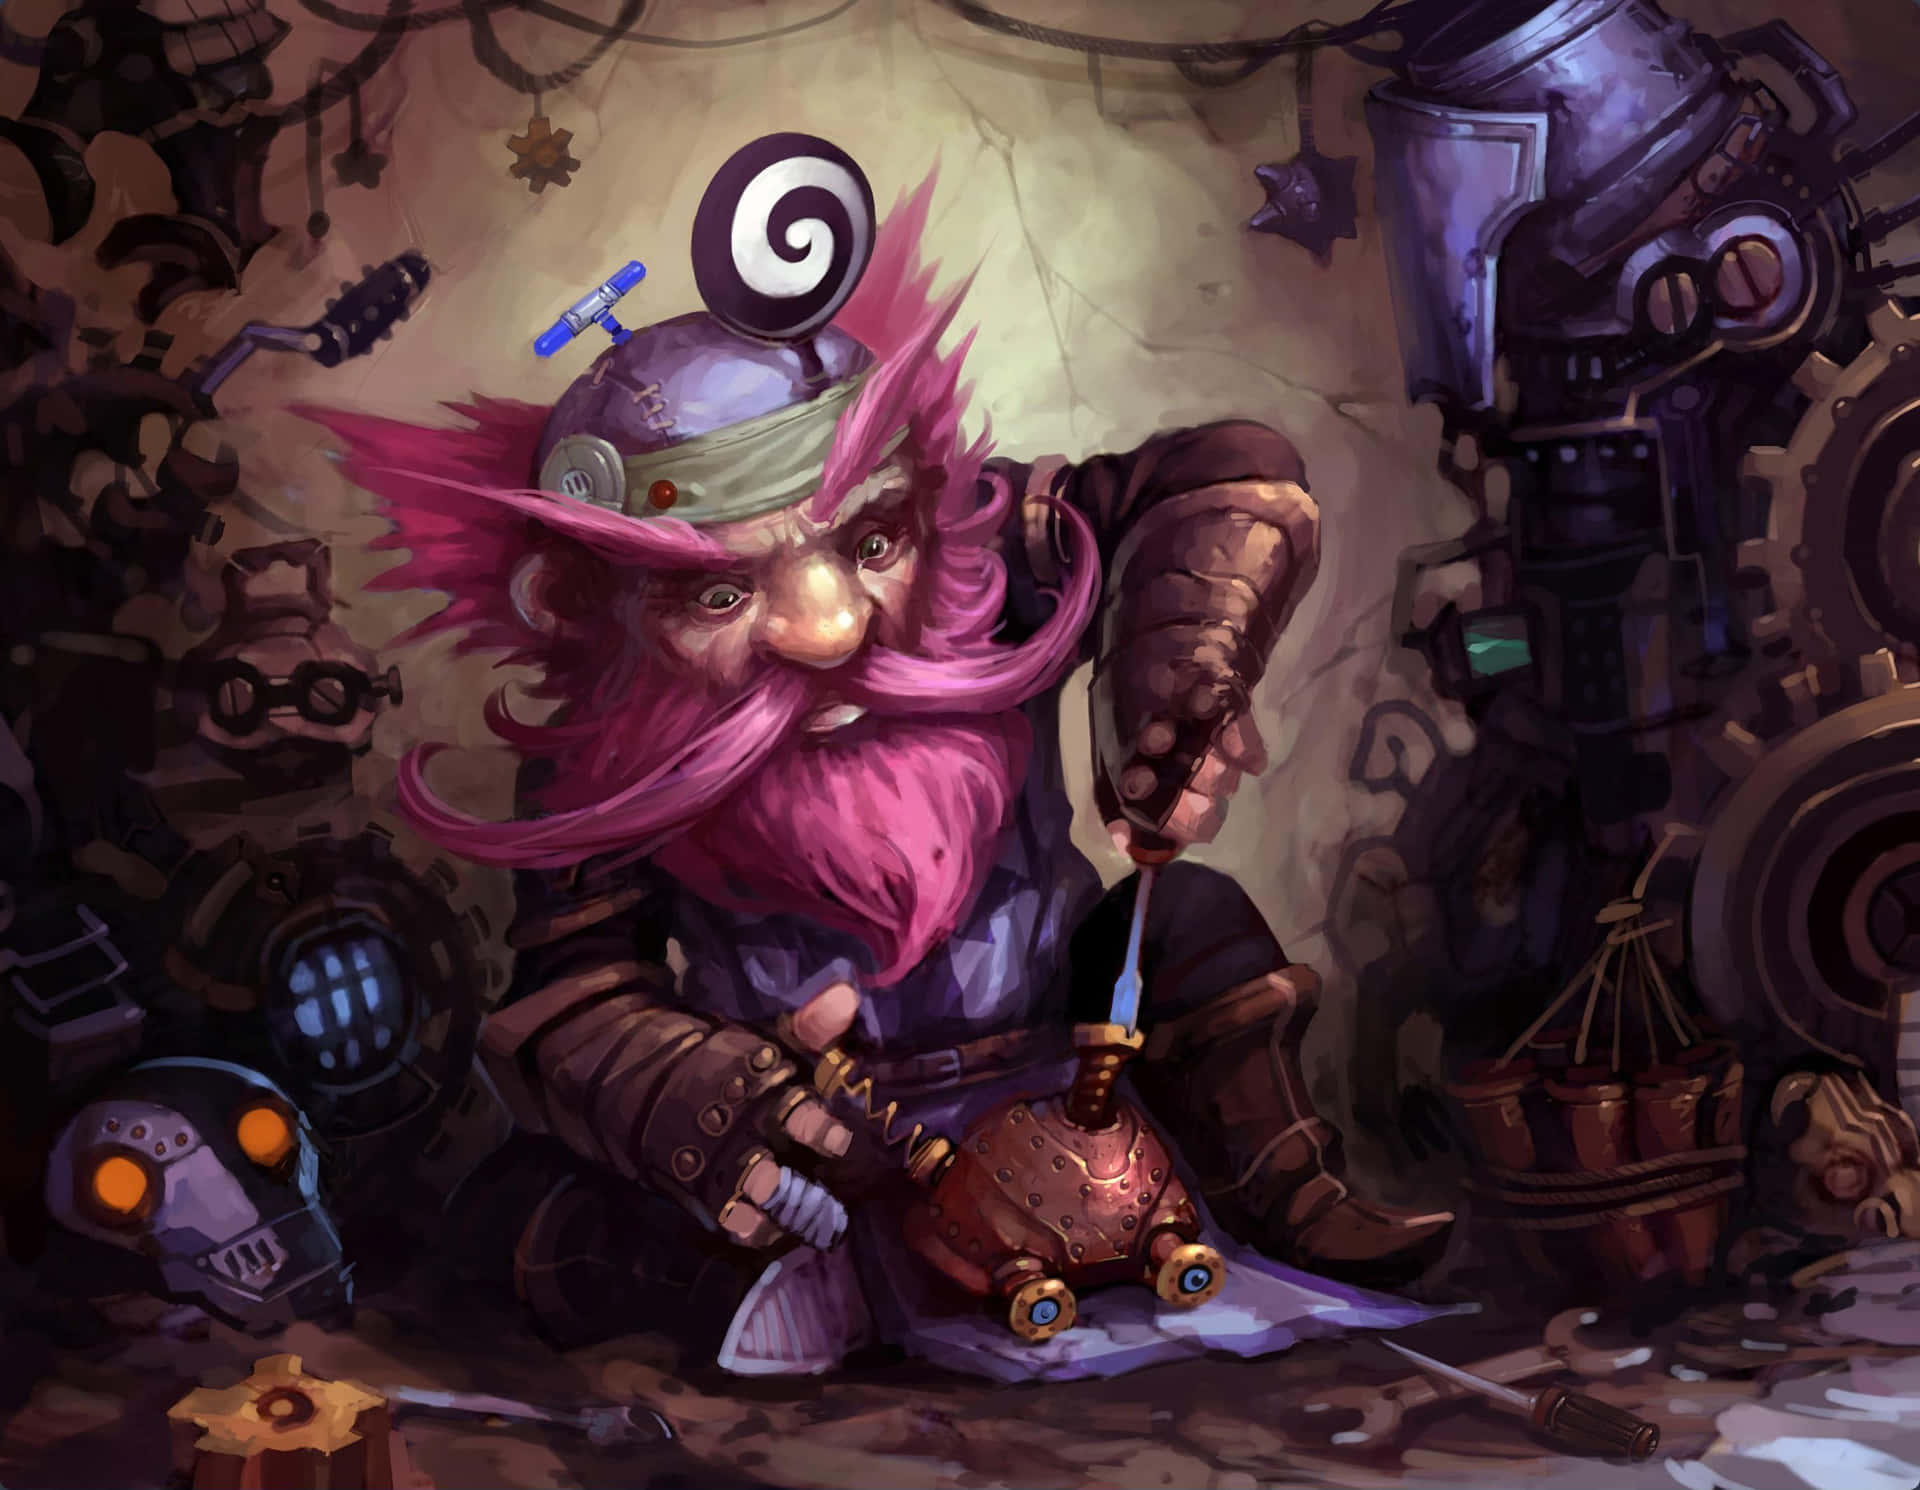 An official HD background for everyone's favourite digital collectable card game - Hearthstone.